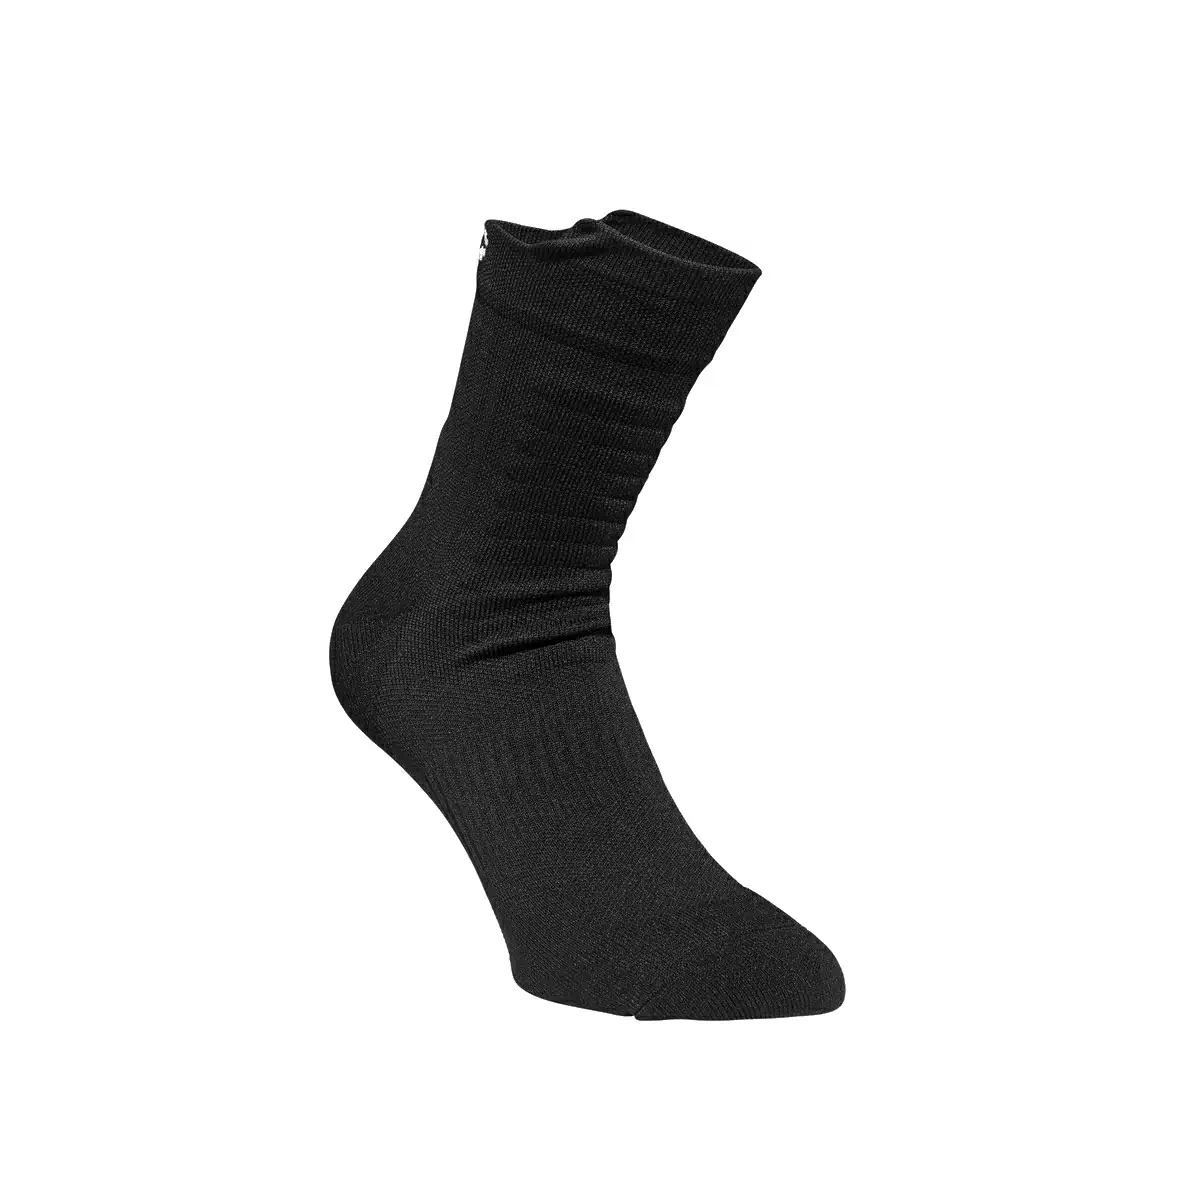 Essential MTB Strong Socks Black Size S - image